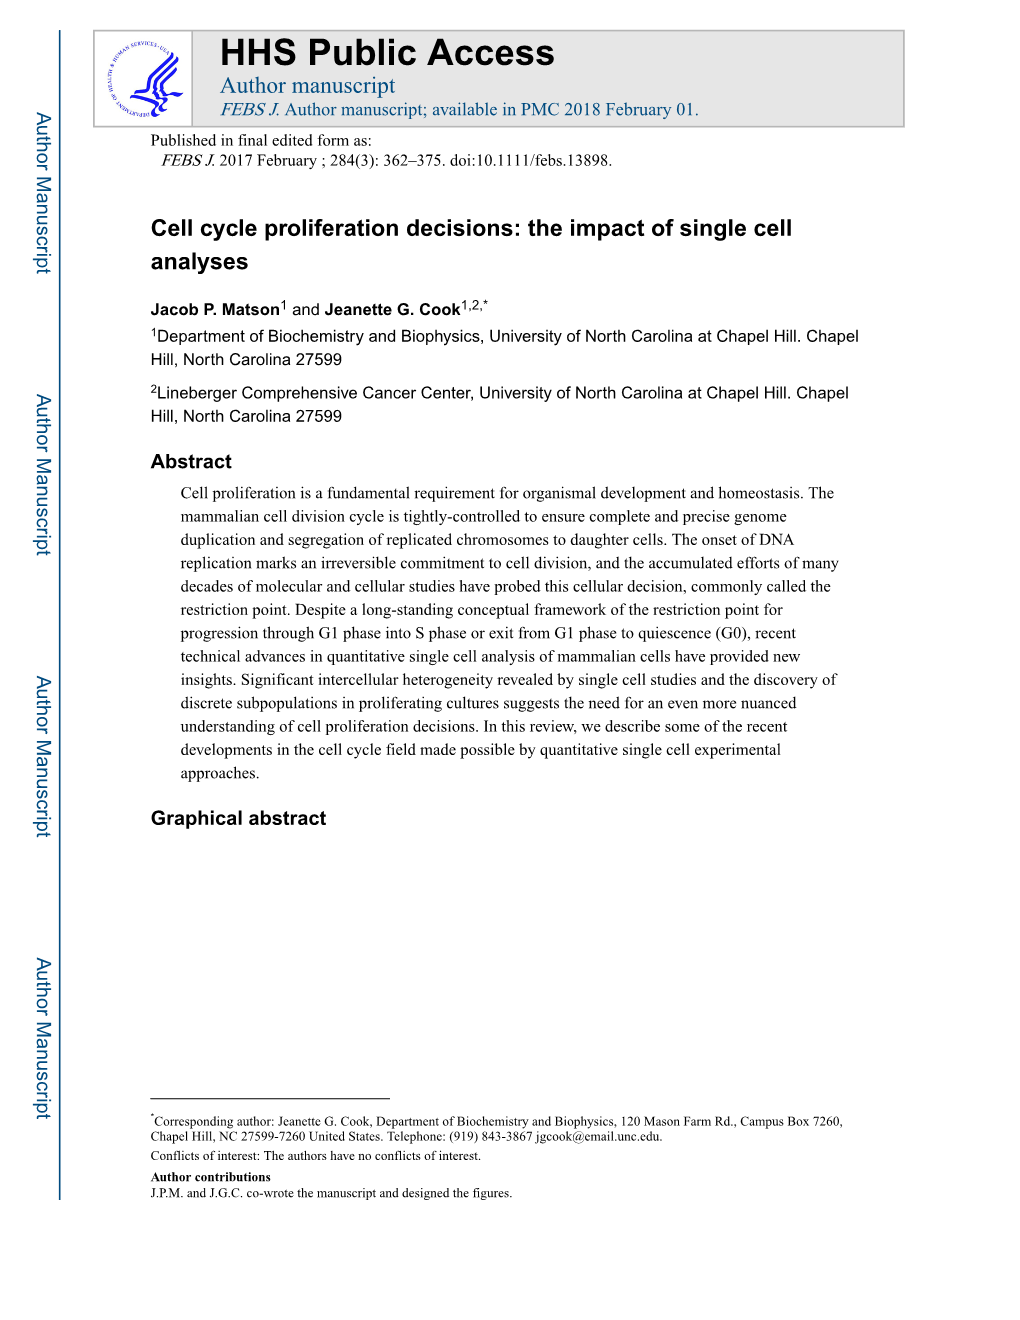 Cell Cycle Proliferation Decisions: the Impact of Single Cell Analyses